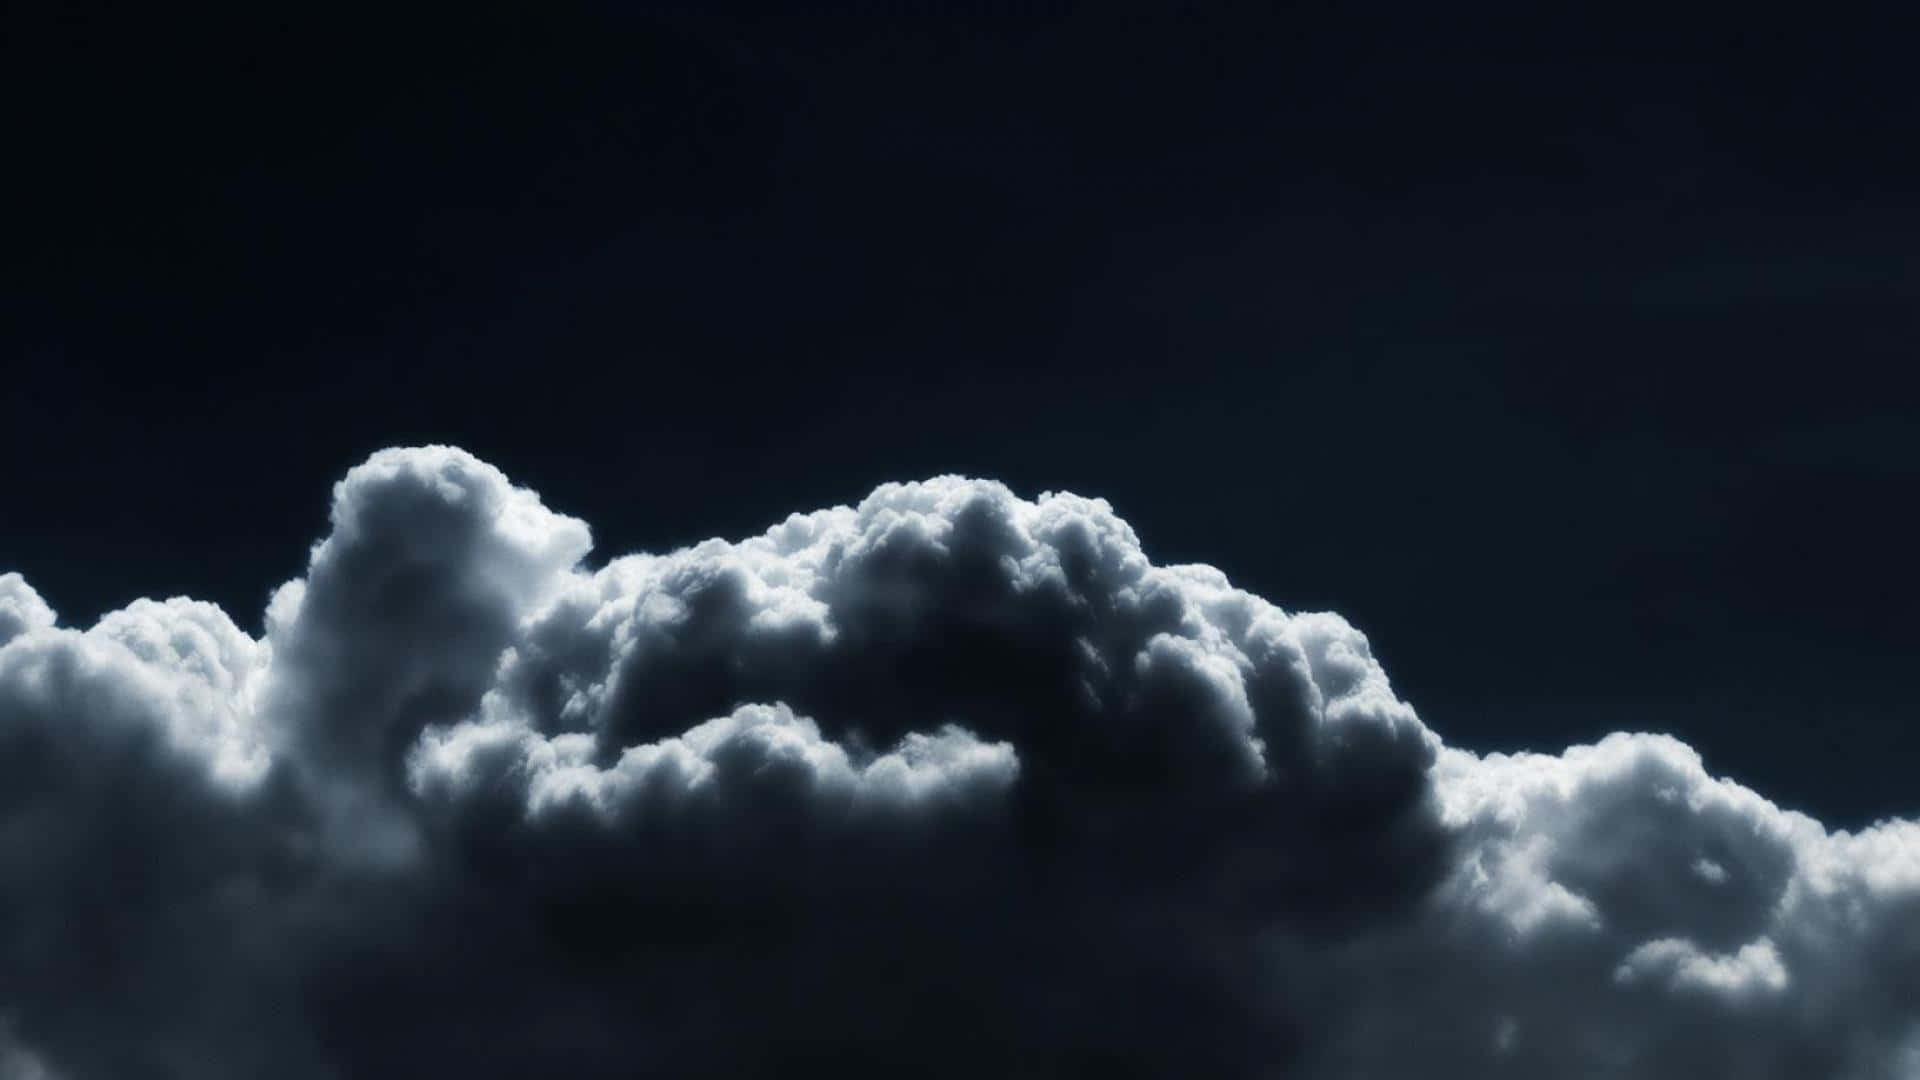 A dramatic view of low-hanging clouds against a black and white sky. Wallpaper